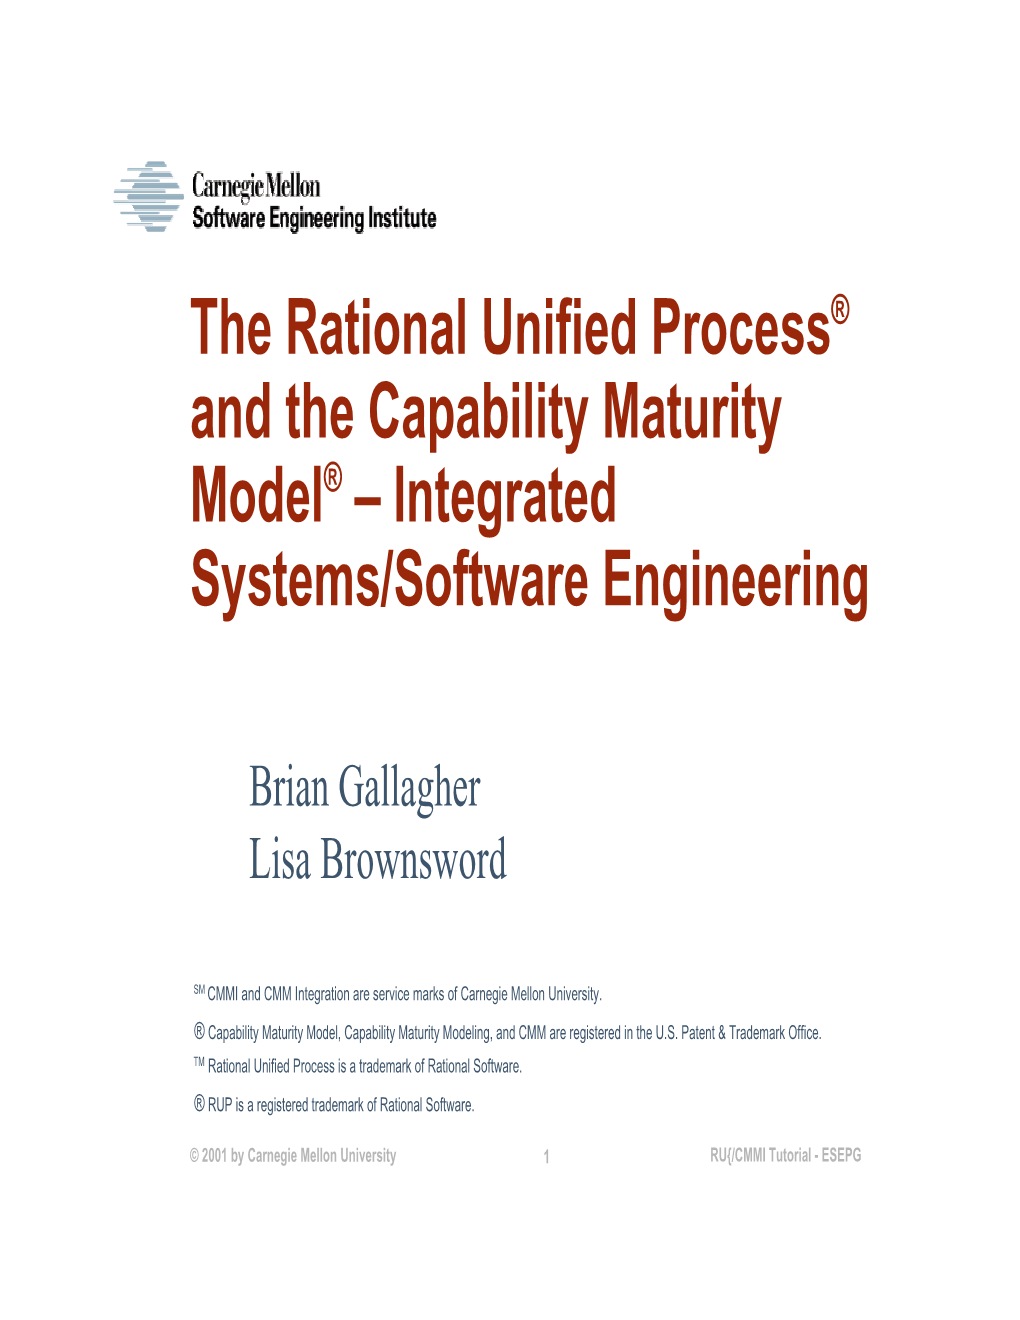 The Rational Unified Process and the Capability Maturity Model